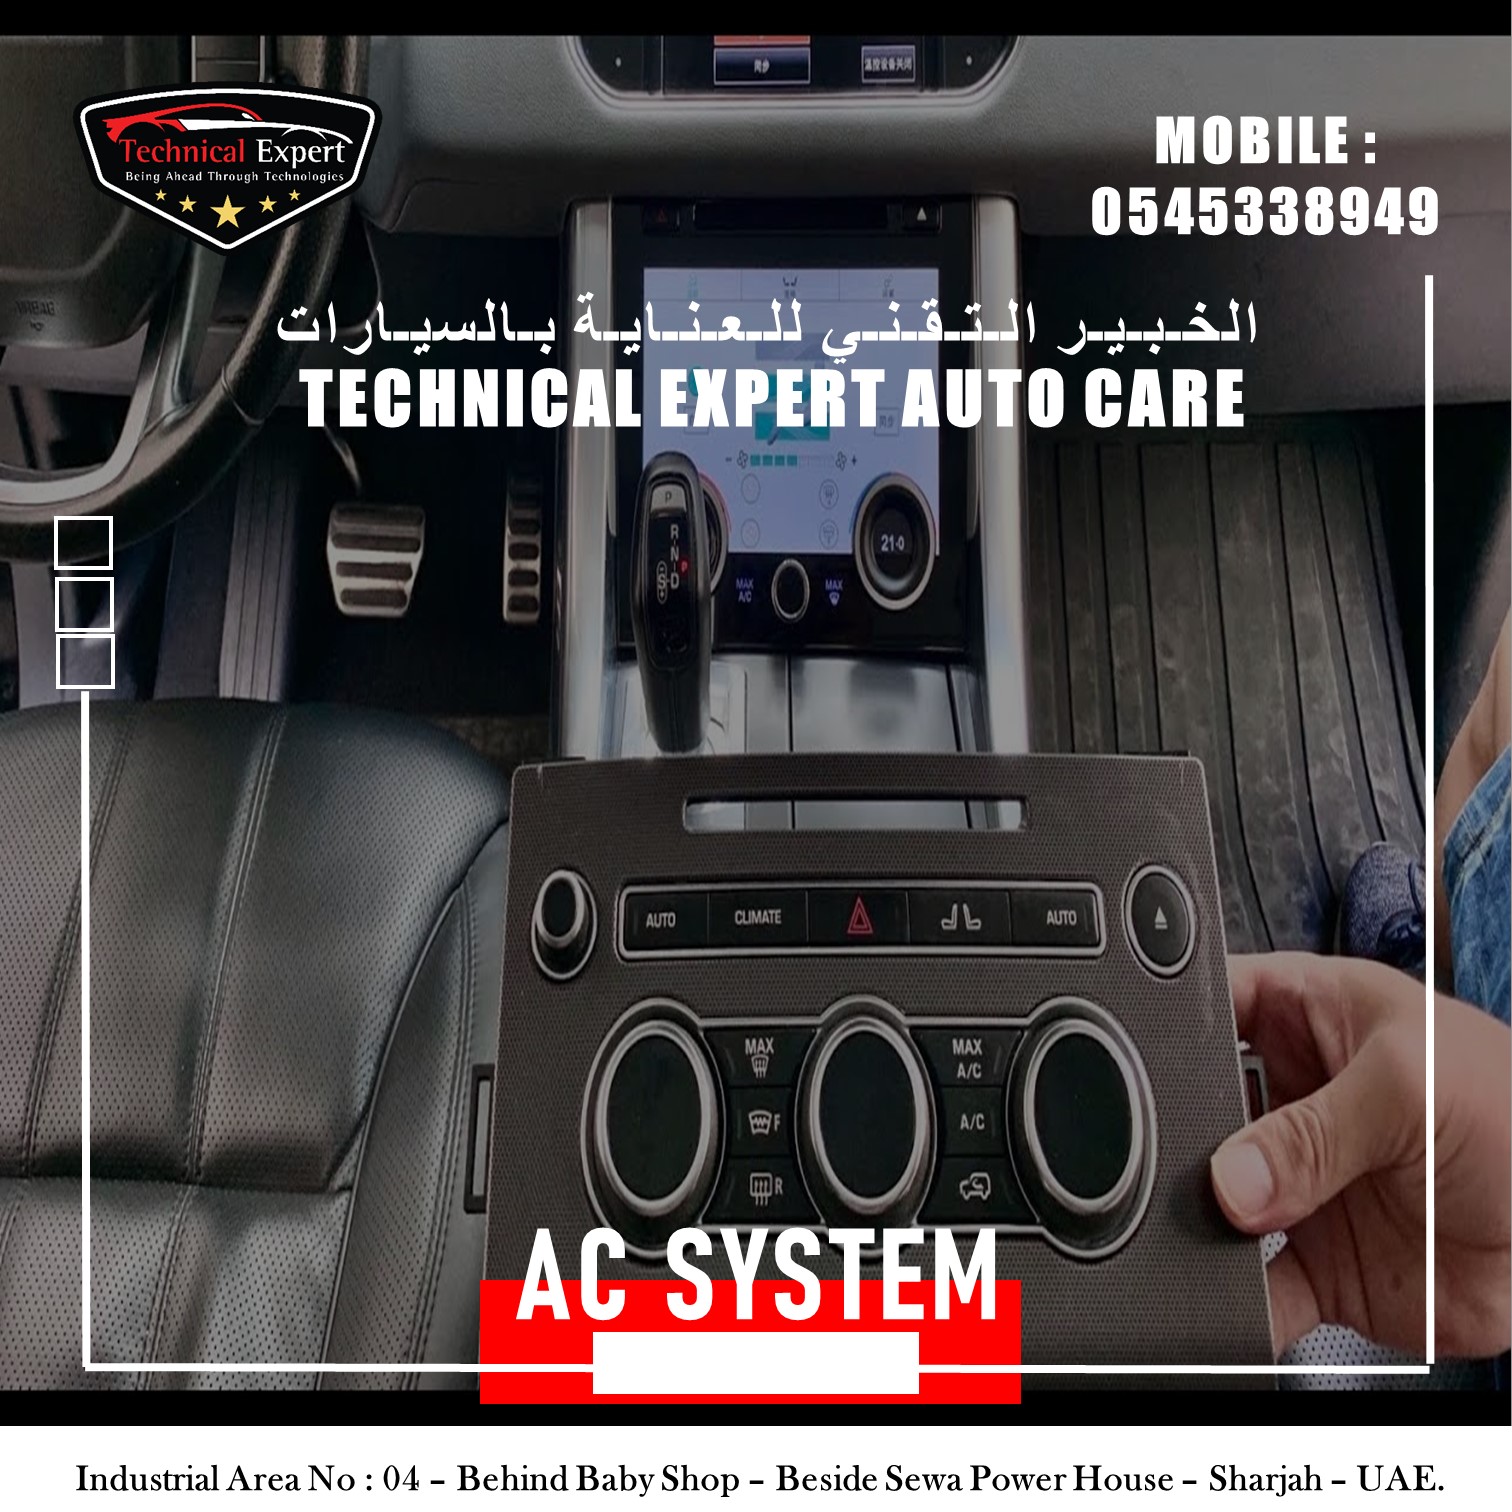 Range Rover AC Repair In Sharjah At Technical Expert Auto Care